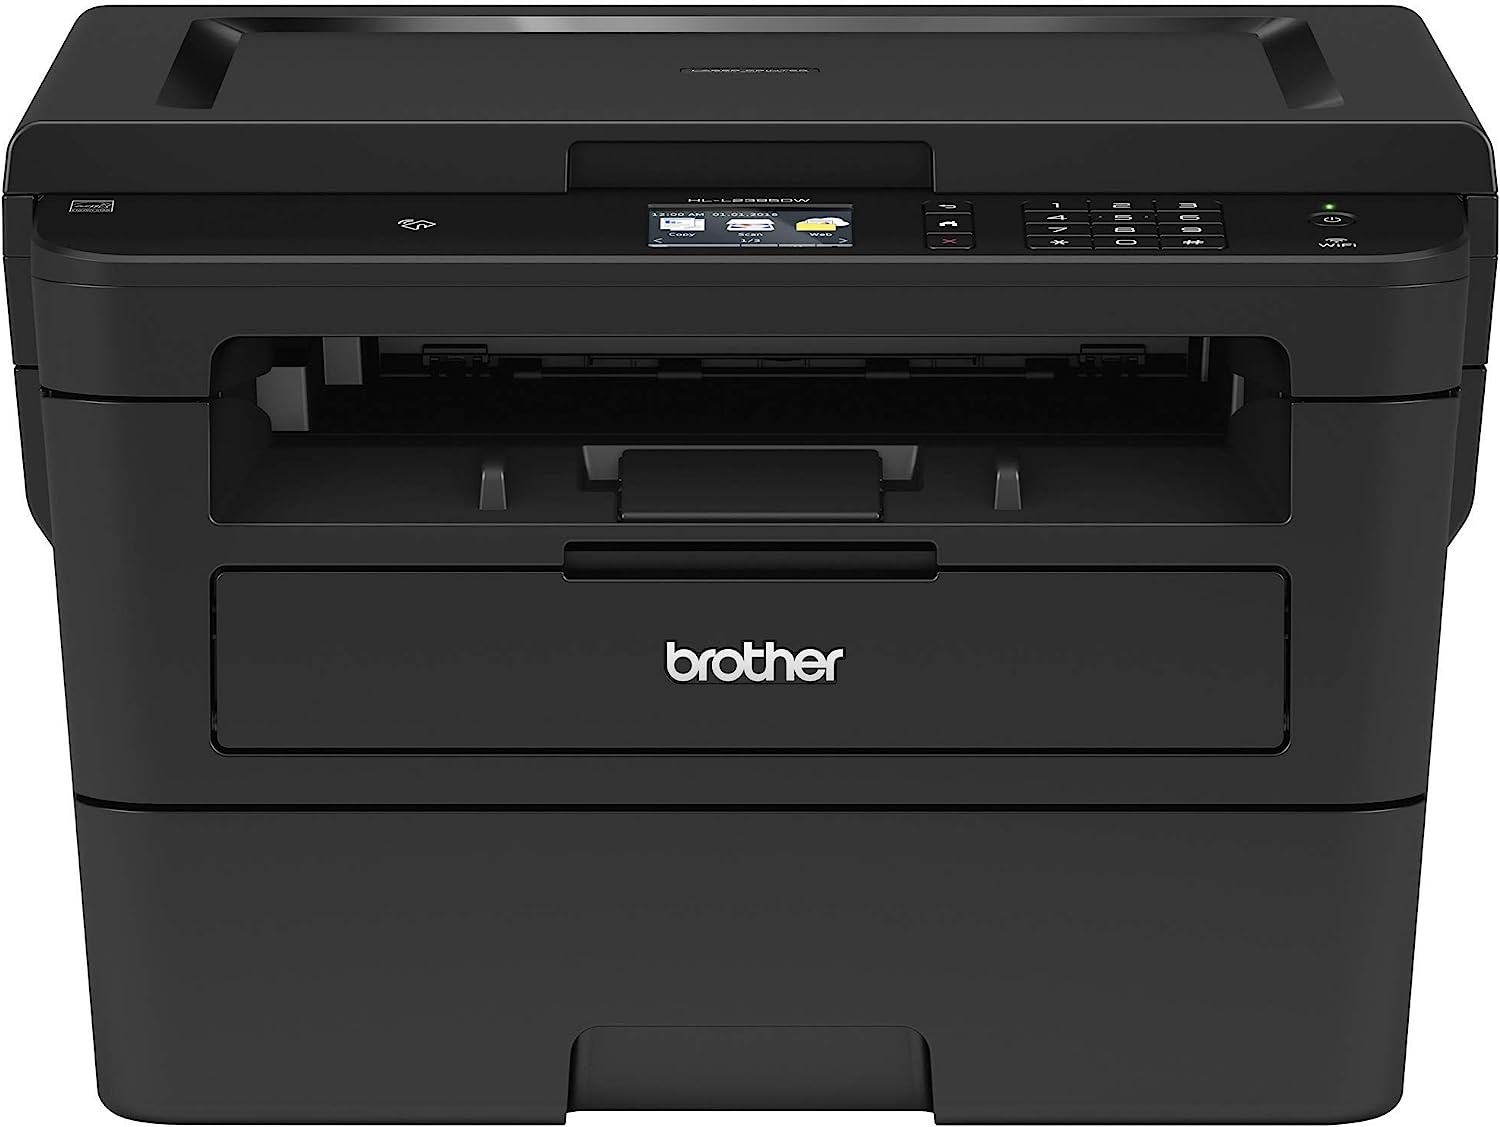 Brother Printer RHLL2395DW Monochrome Printer with [...]